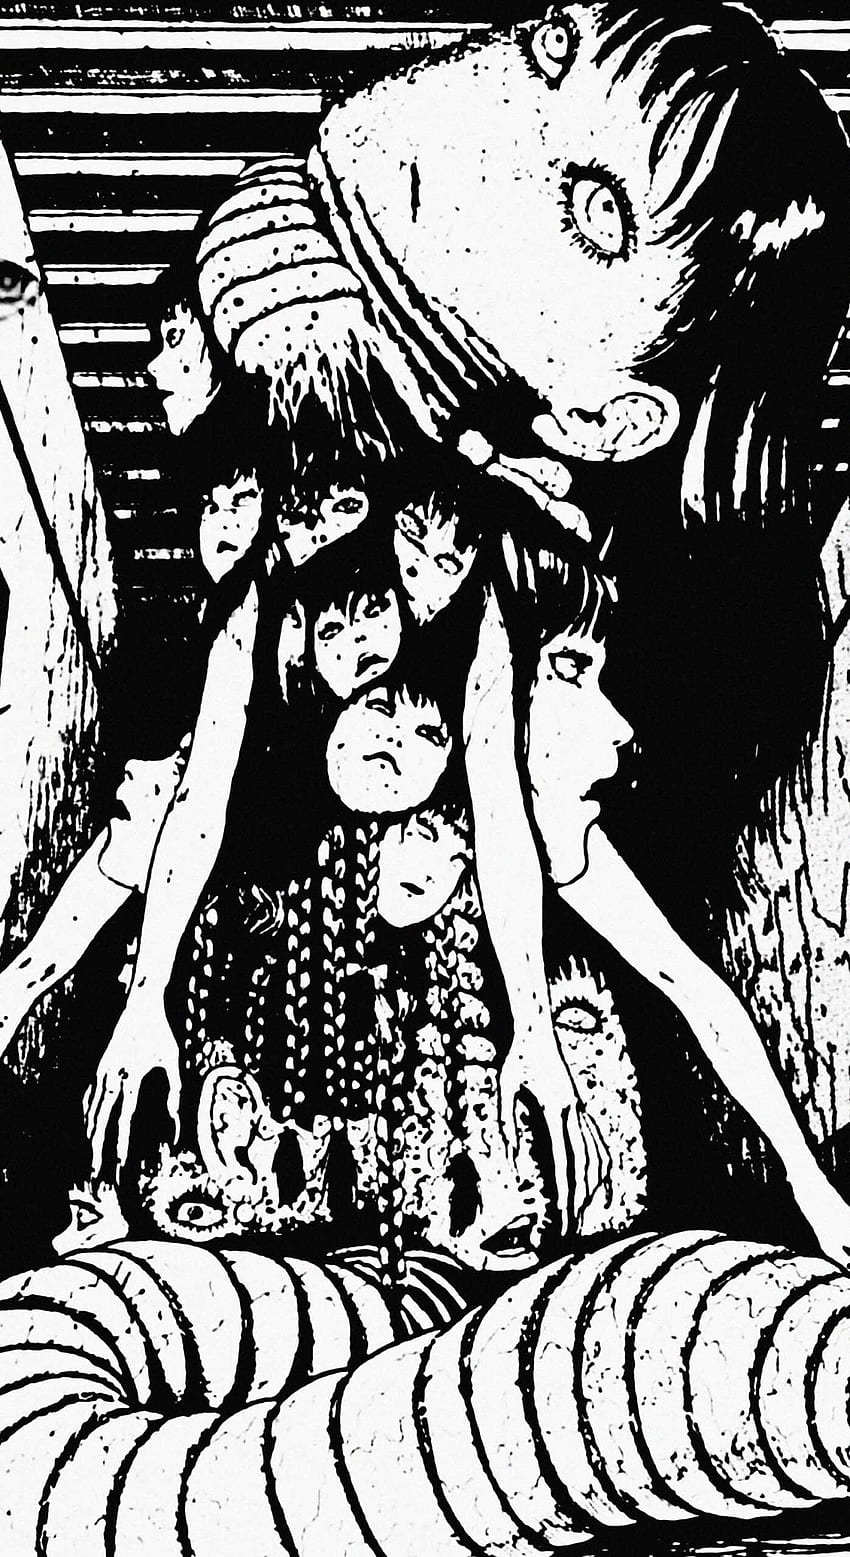 Junji Ito  Tomie wallpaper by Actaevate  Download on ZEDGE  f109